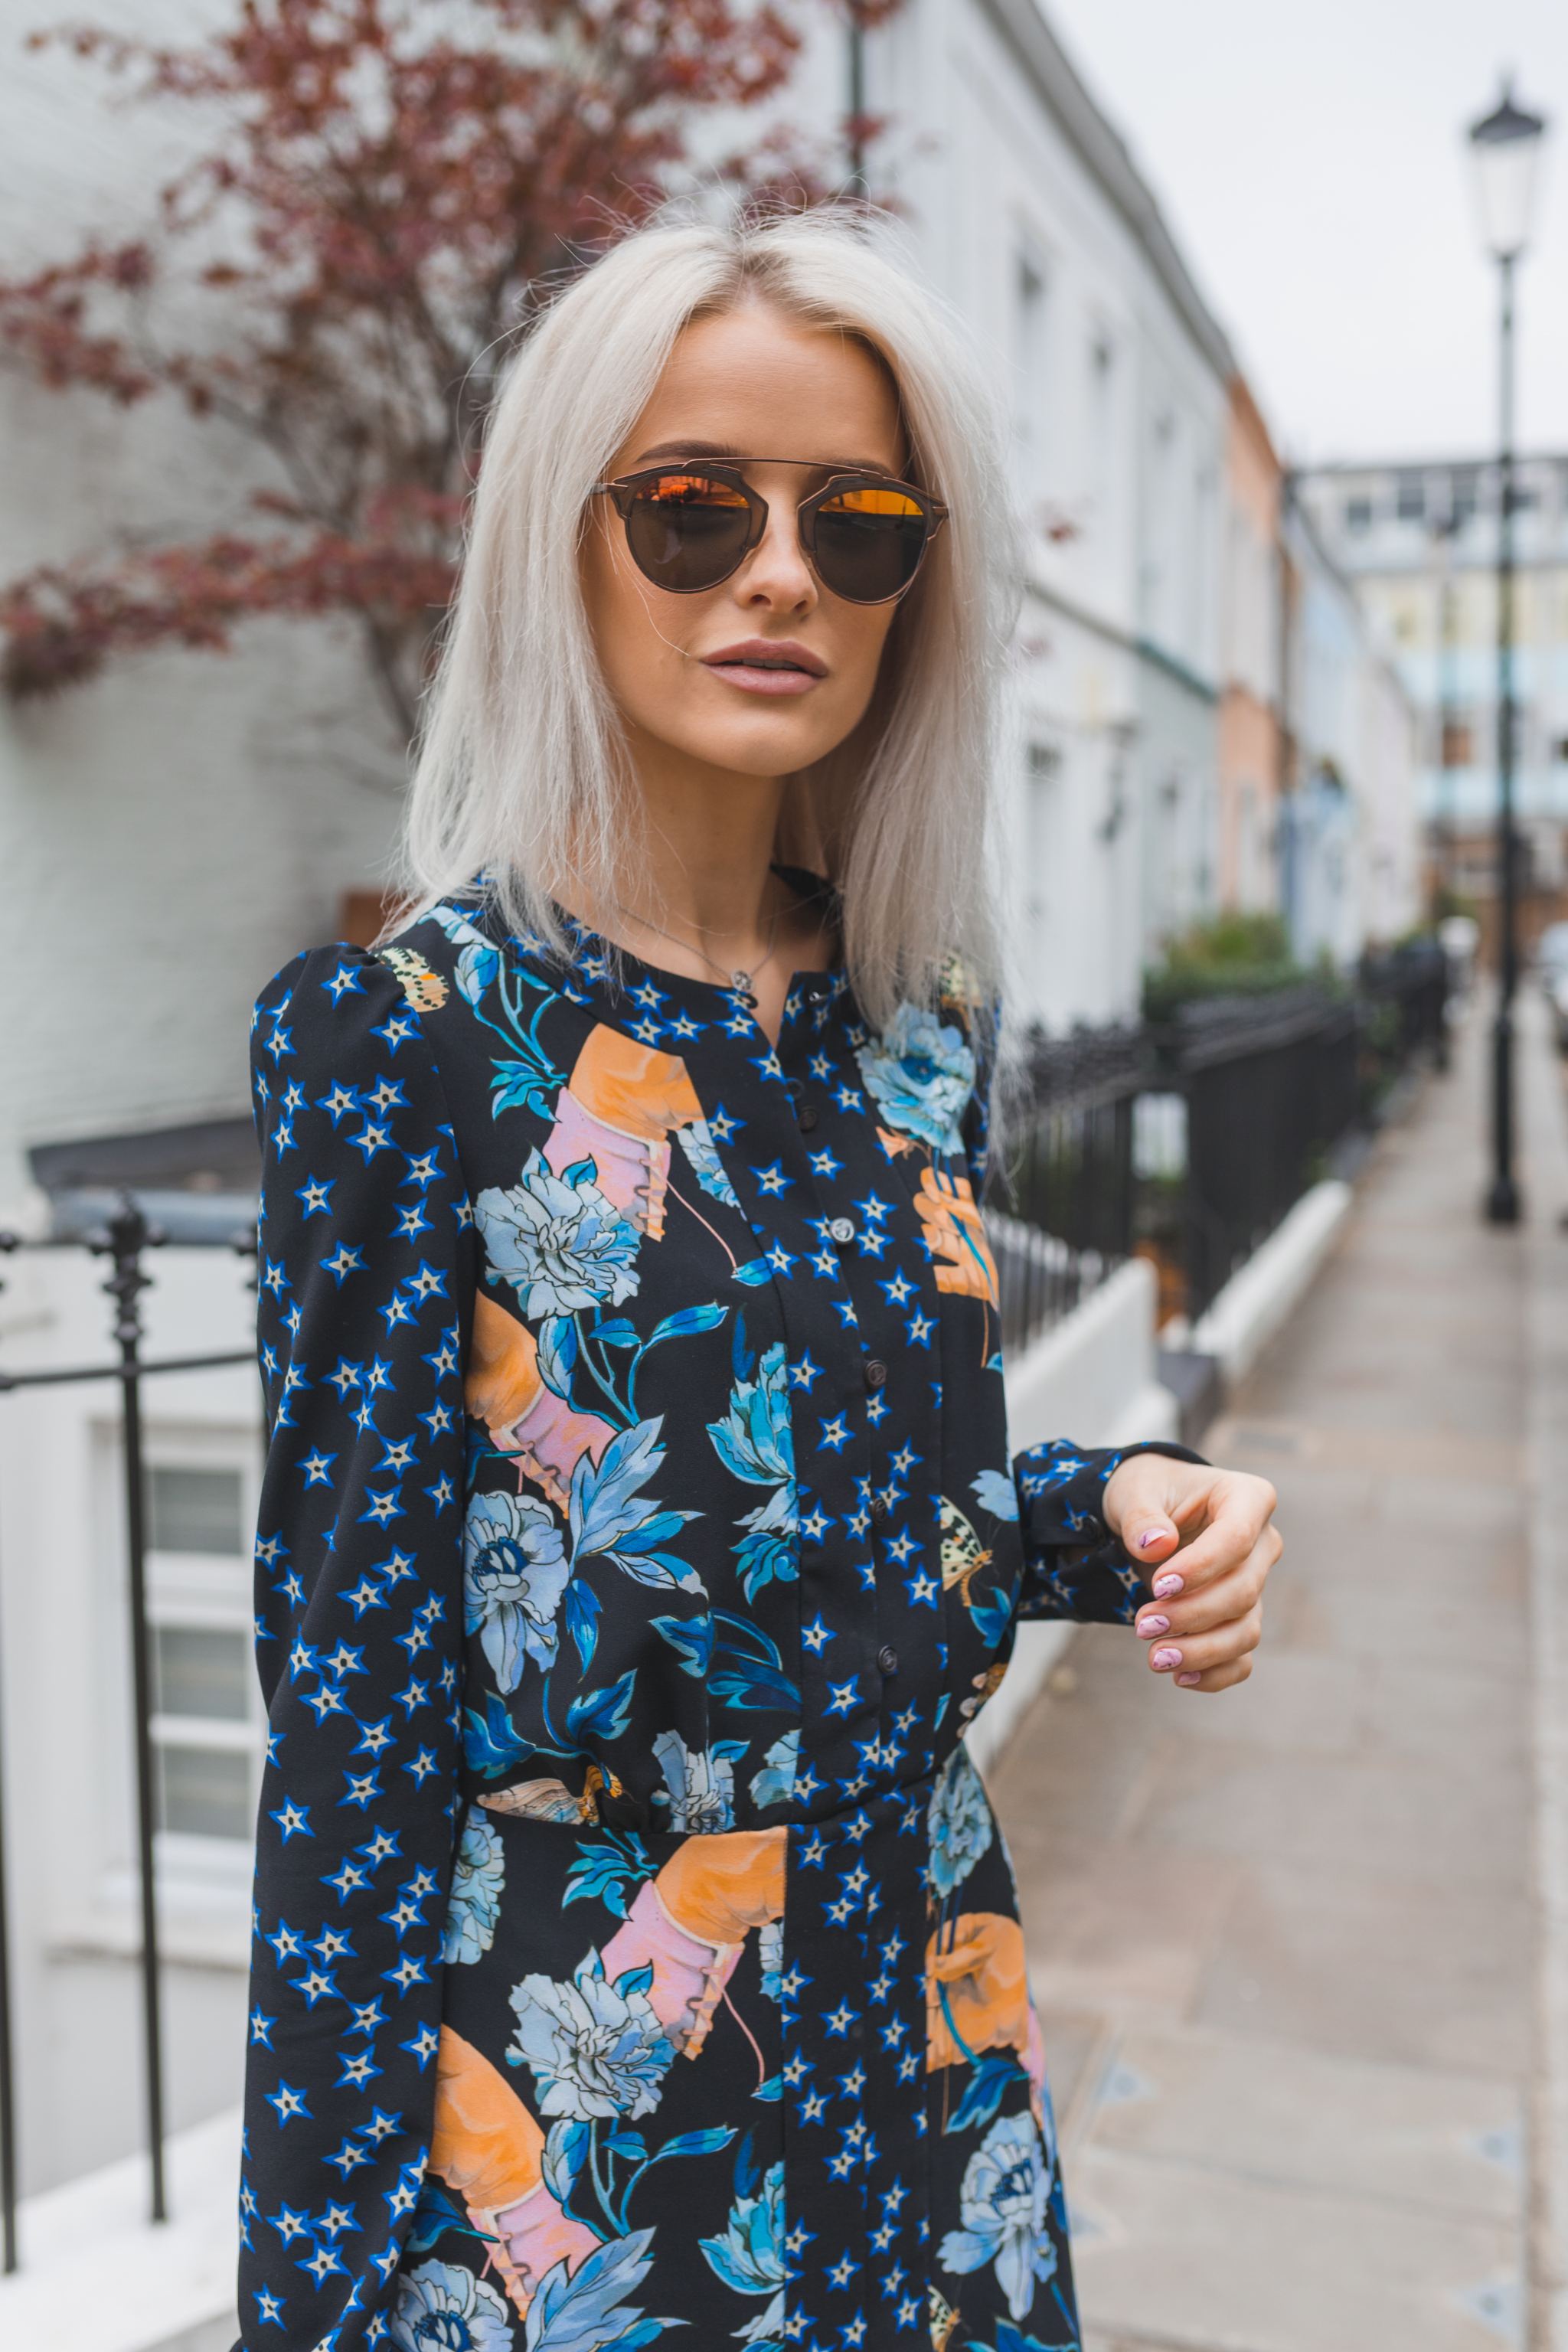 10 Most Frequently Asked Questions - Inthefrow